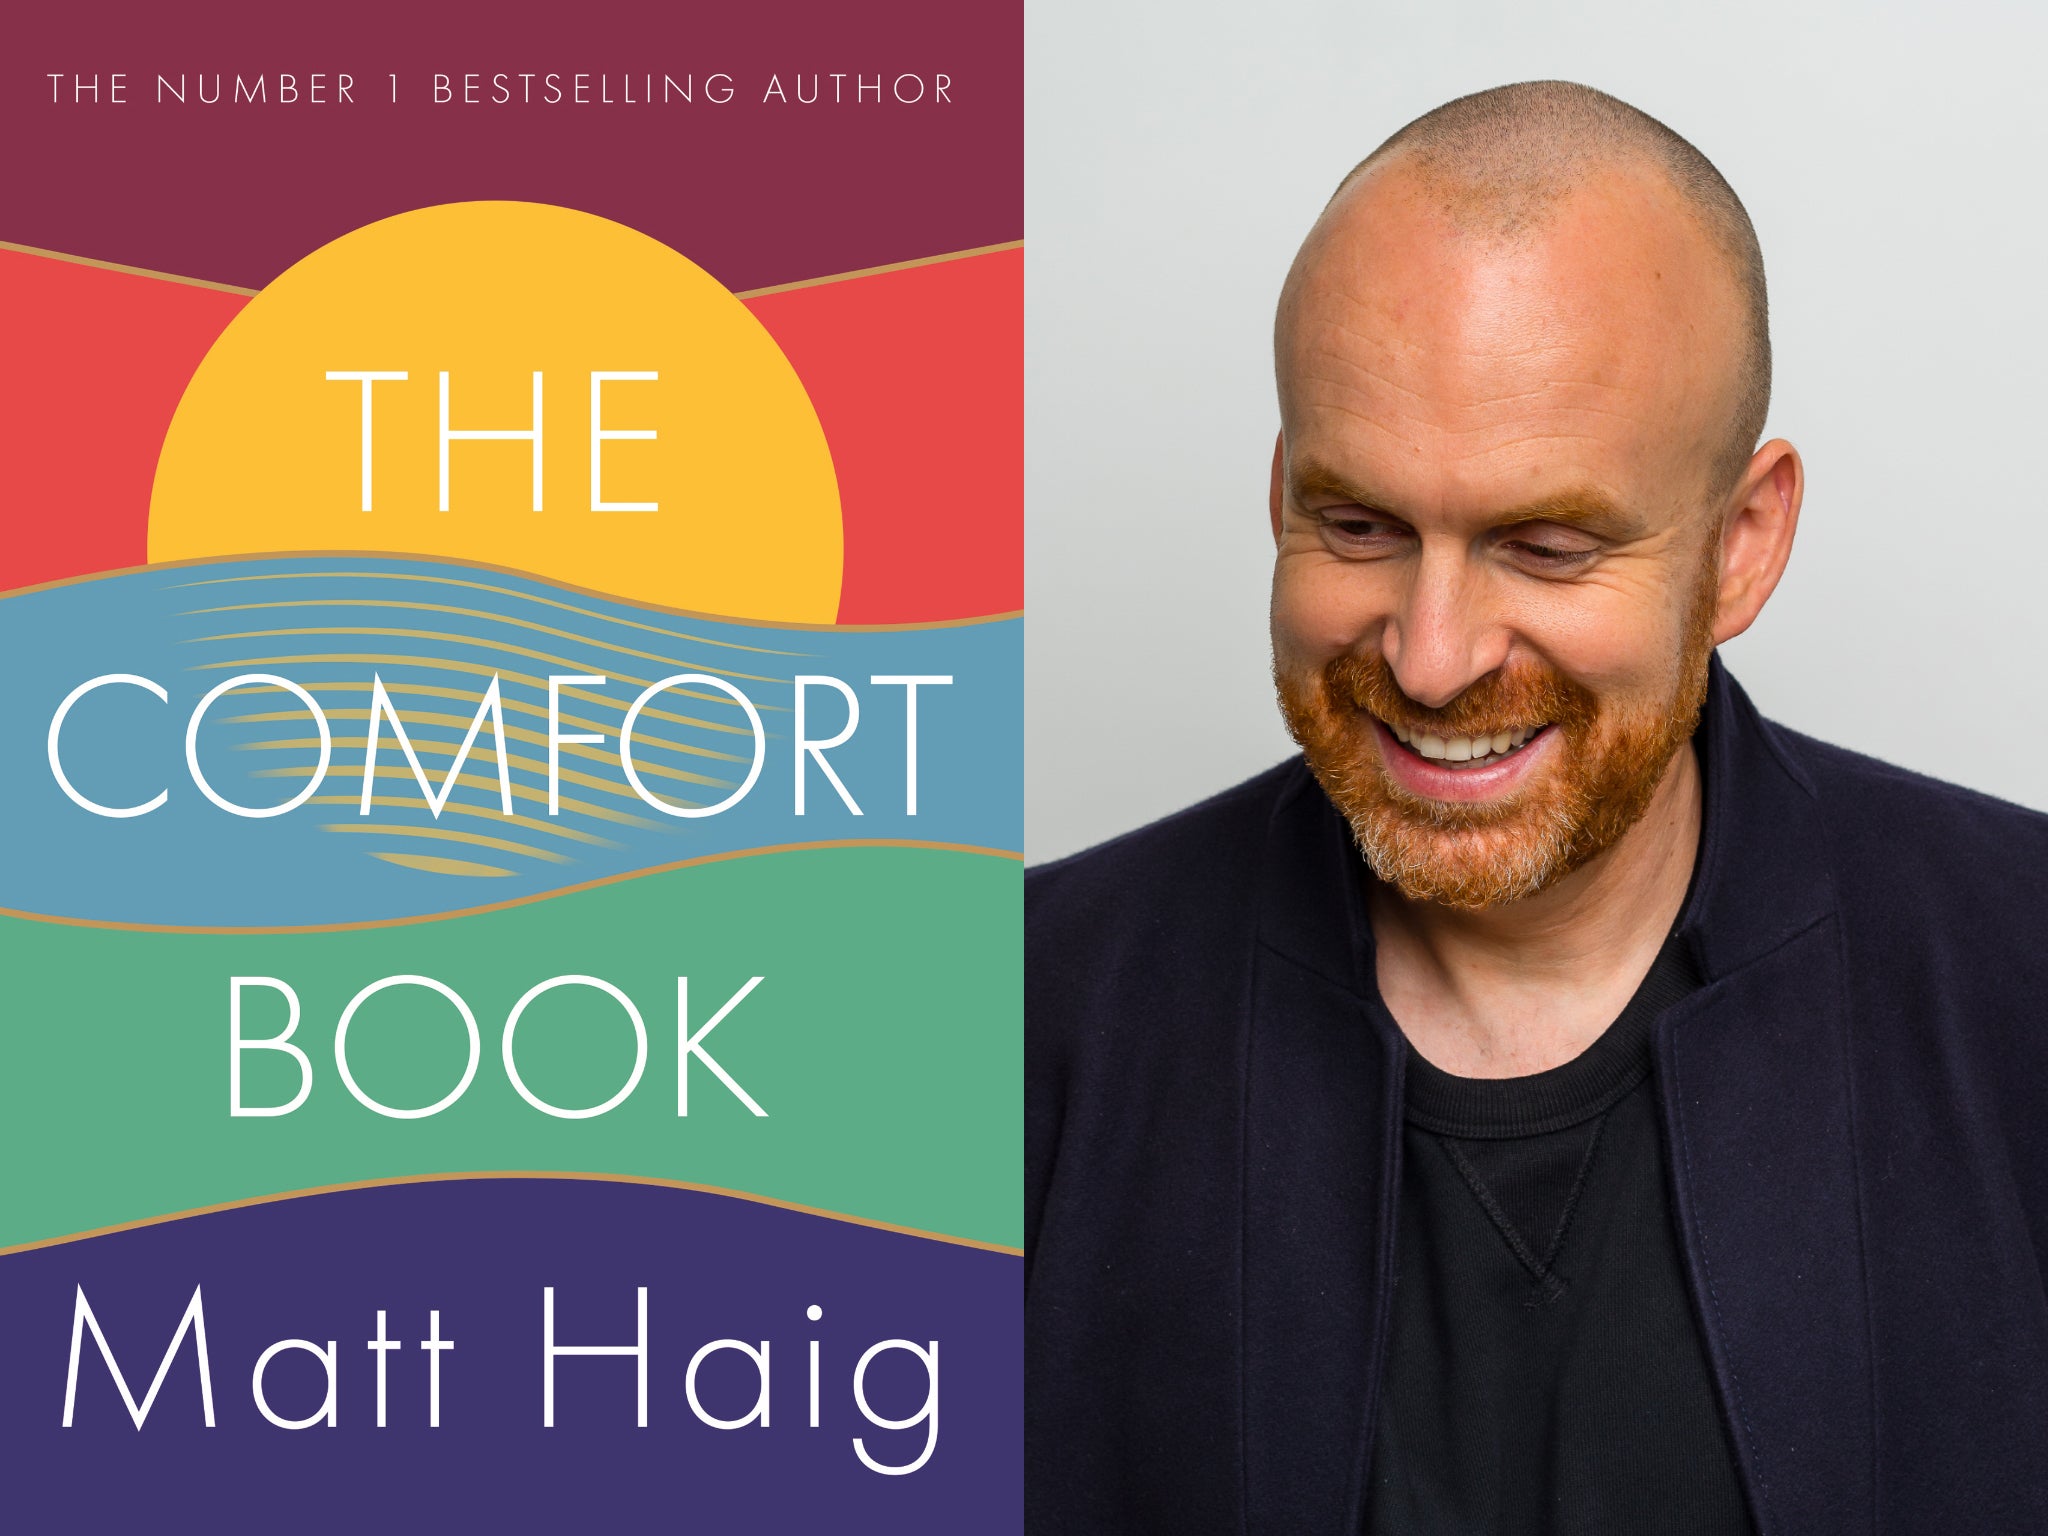 Matt Haig’s publication – described as ‘a hug in book form’ – is full of eloquent, cogent and positive reminders of the beauty of life